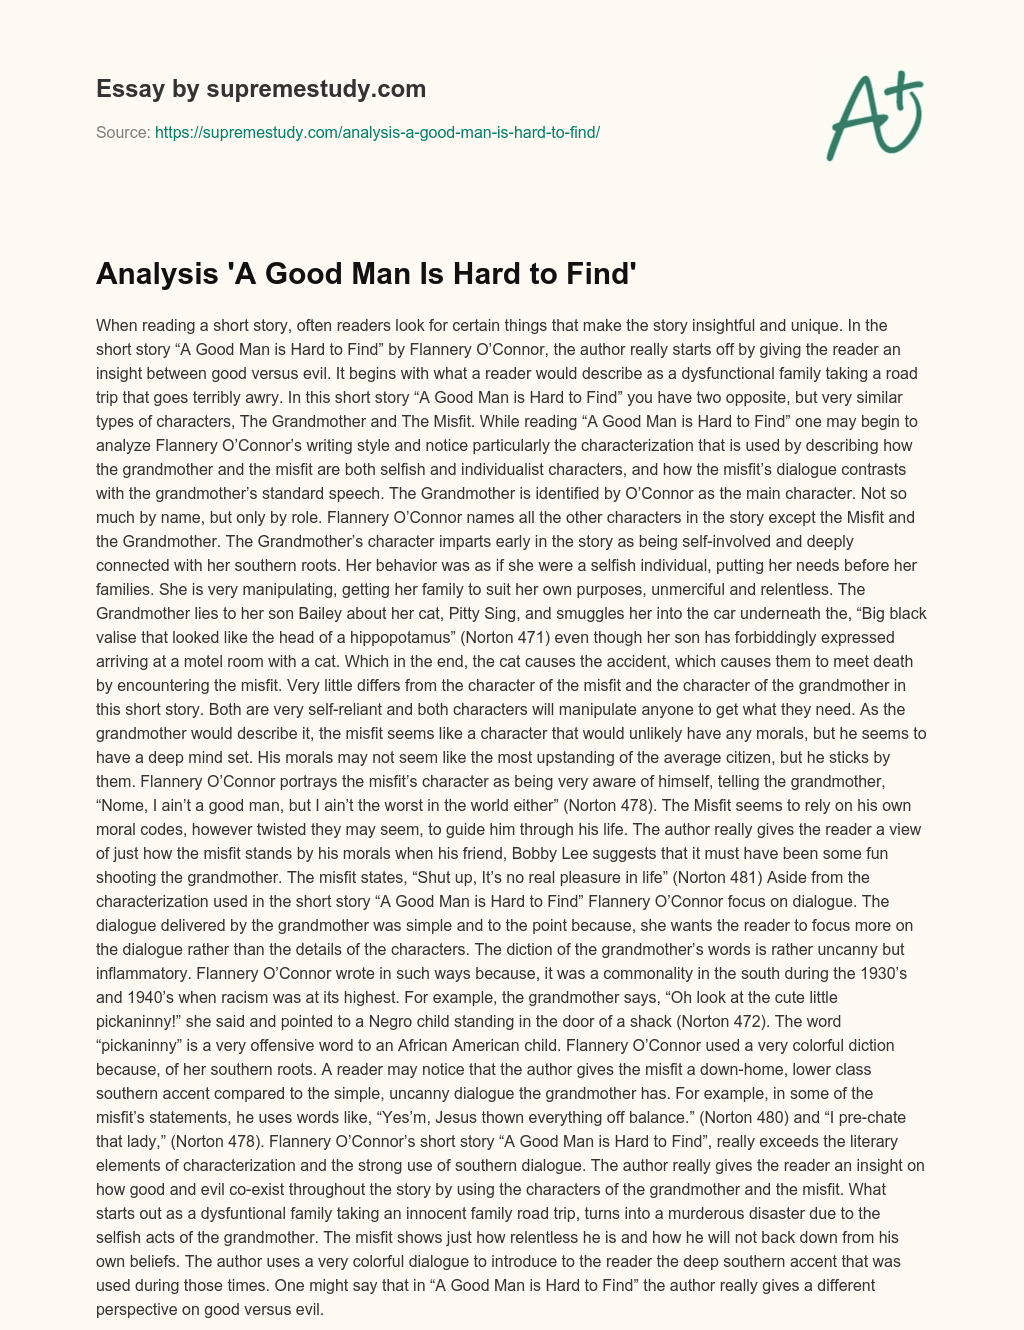 thesis statement about a good man is hard to find